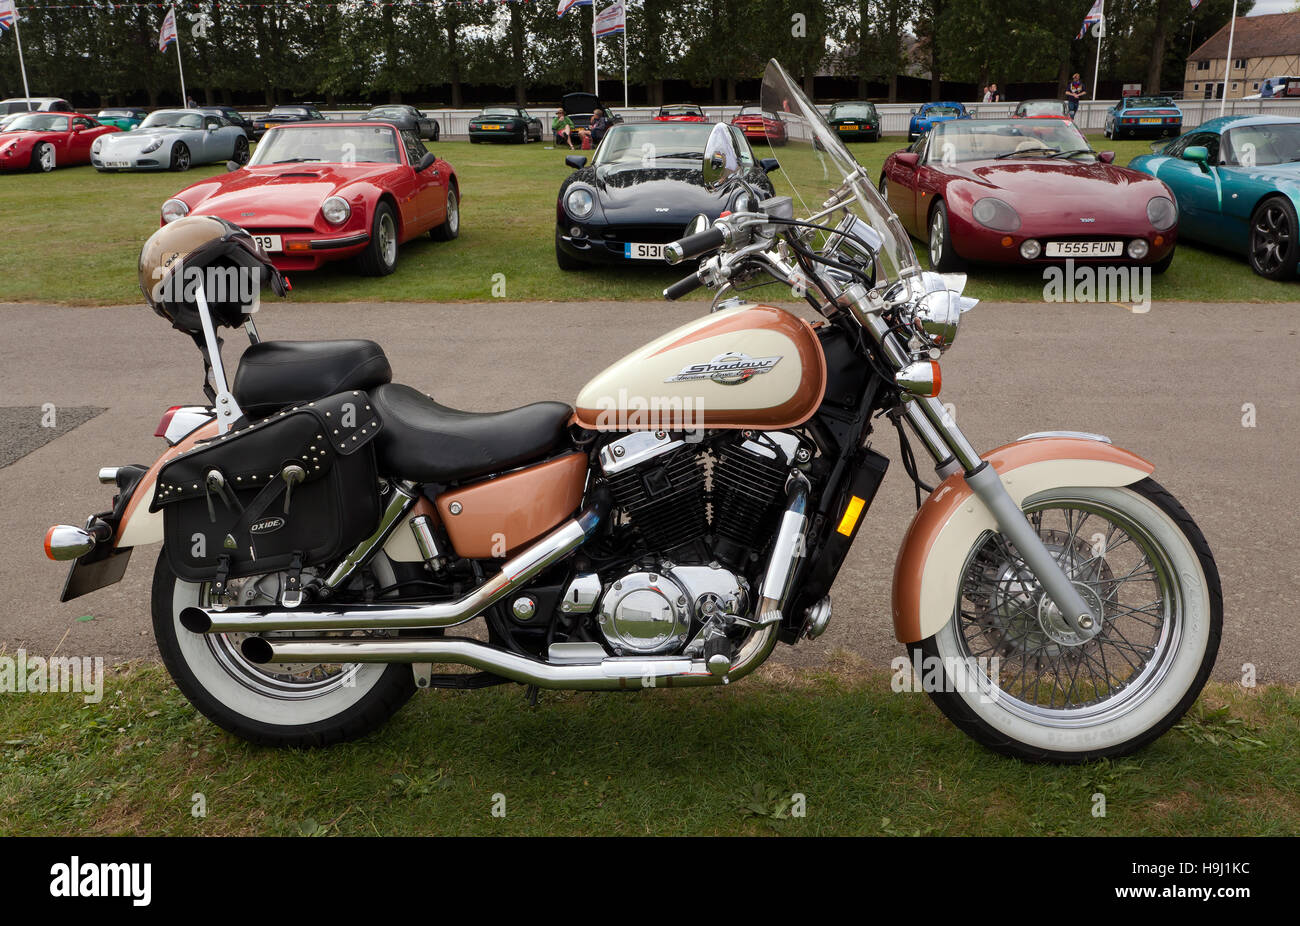 Image of a Honda Shadow Motorcycle (American Classic Edition) displayed